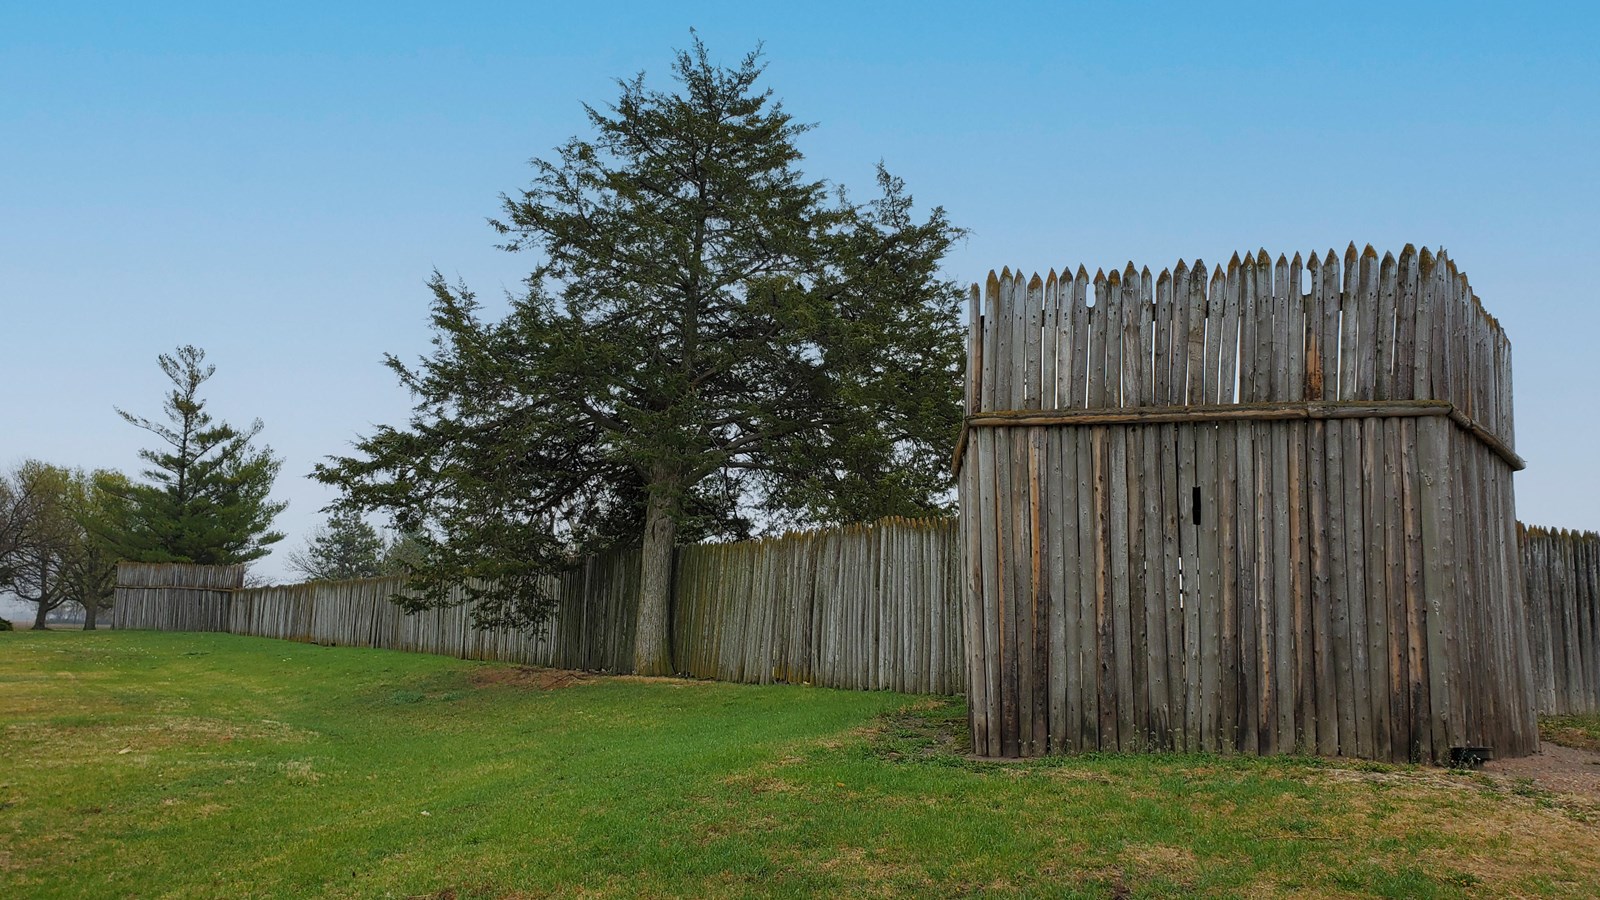 Wood stockade twice the height of a person with evergreen tree beside.